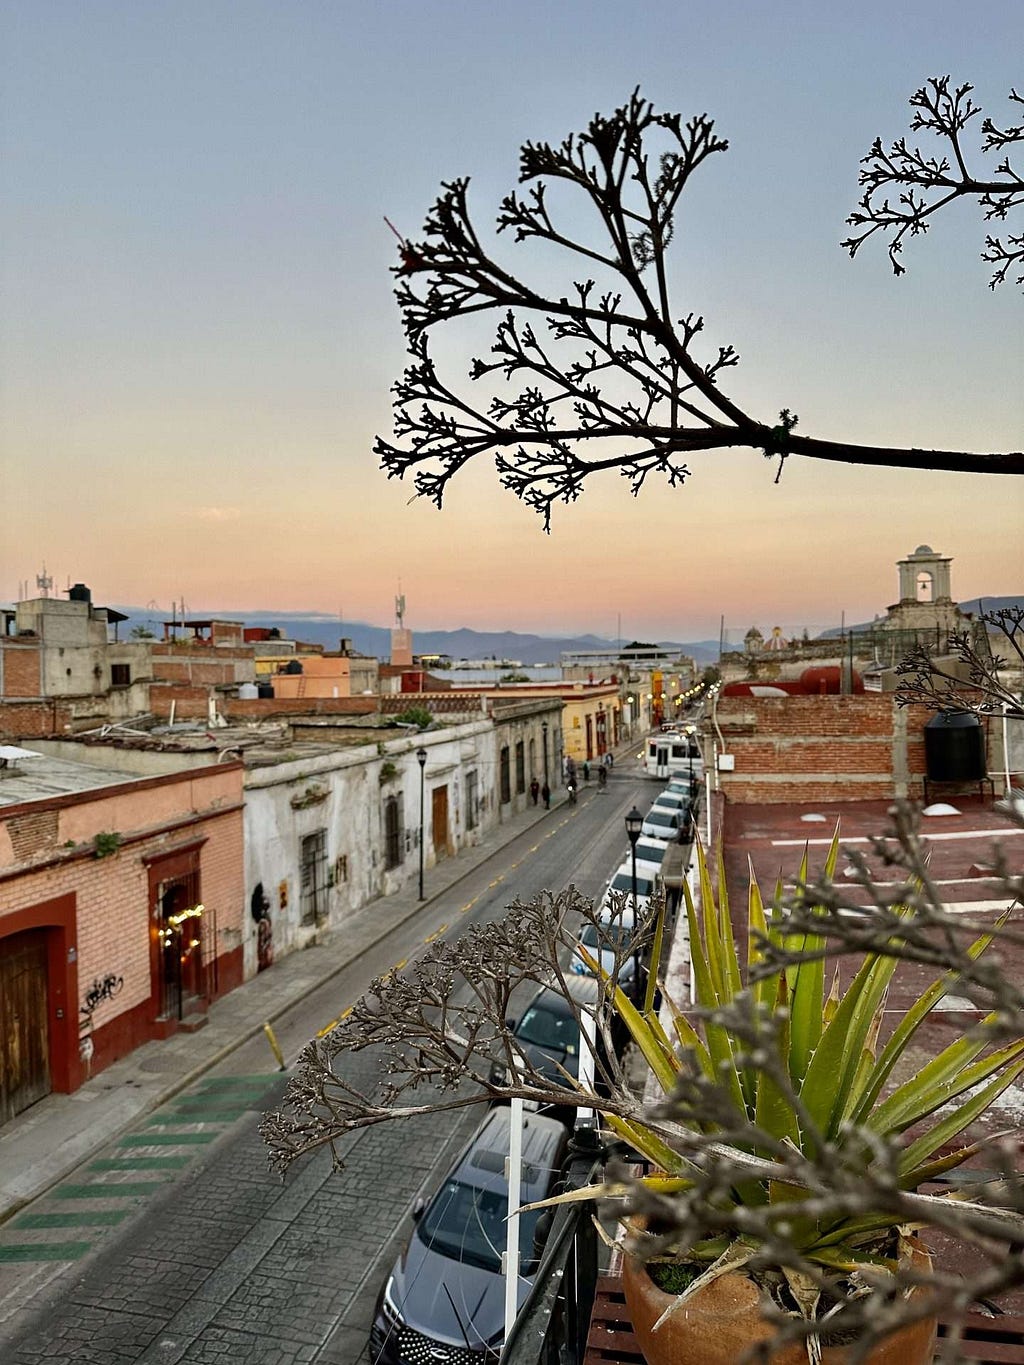 A view from a rooftop bar in Oaxaca overlooking the city with the sun setting